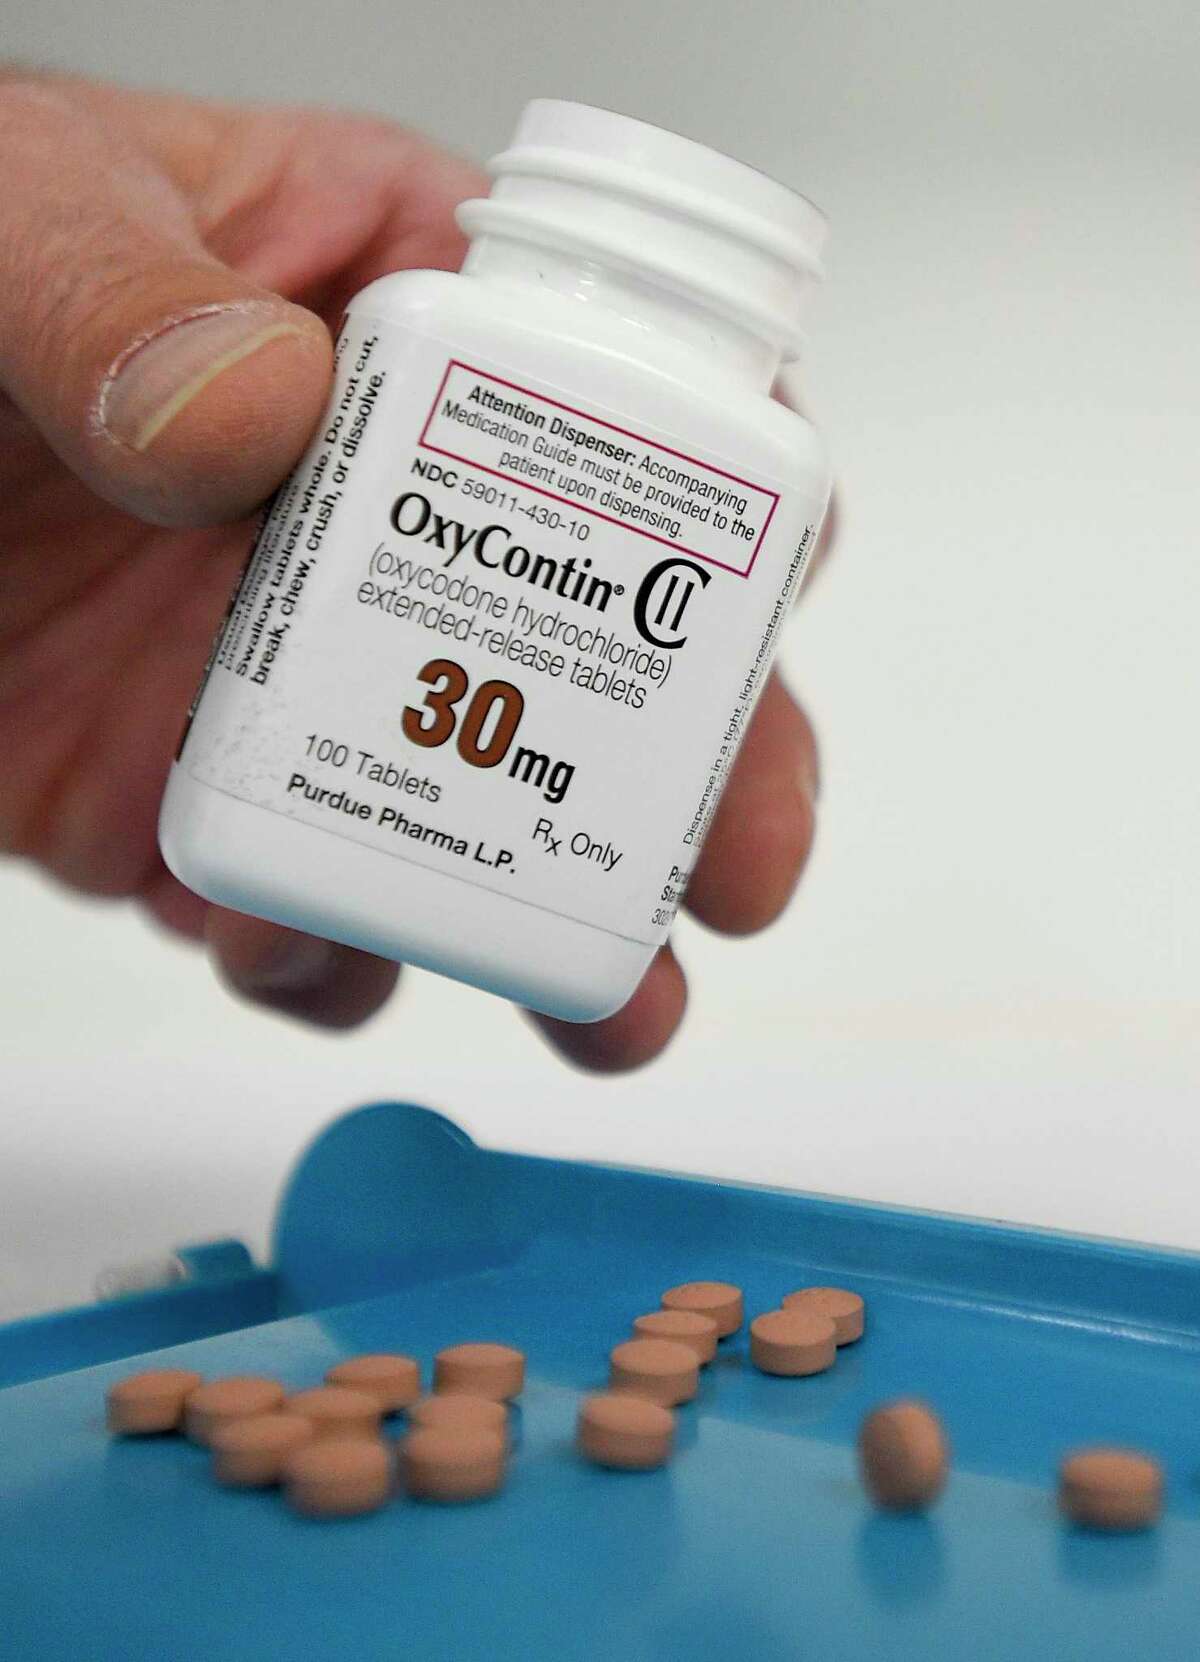 The prescription opioid OxyContin is Stamford, Conn.-based Purdue Pharma’s top-selling drug, have generated revenues of more than $20 billion since 2010.